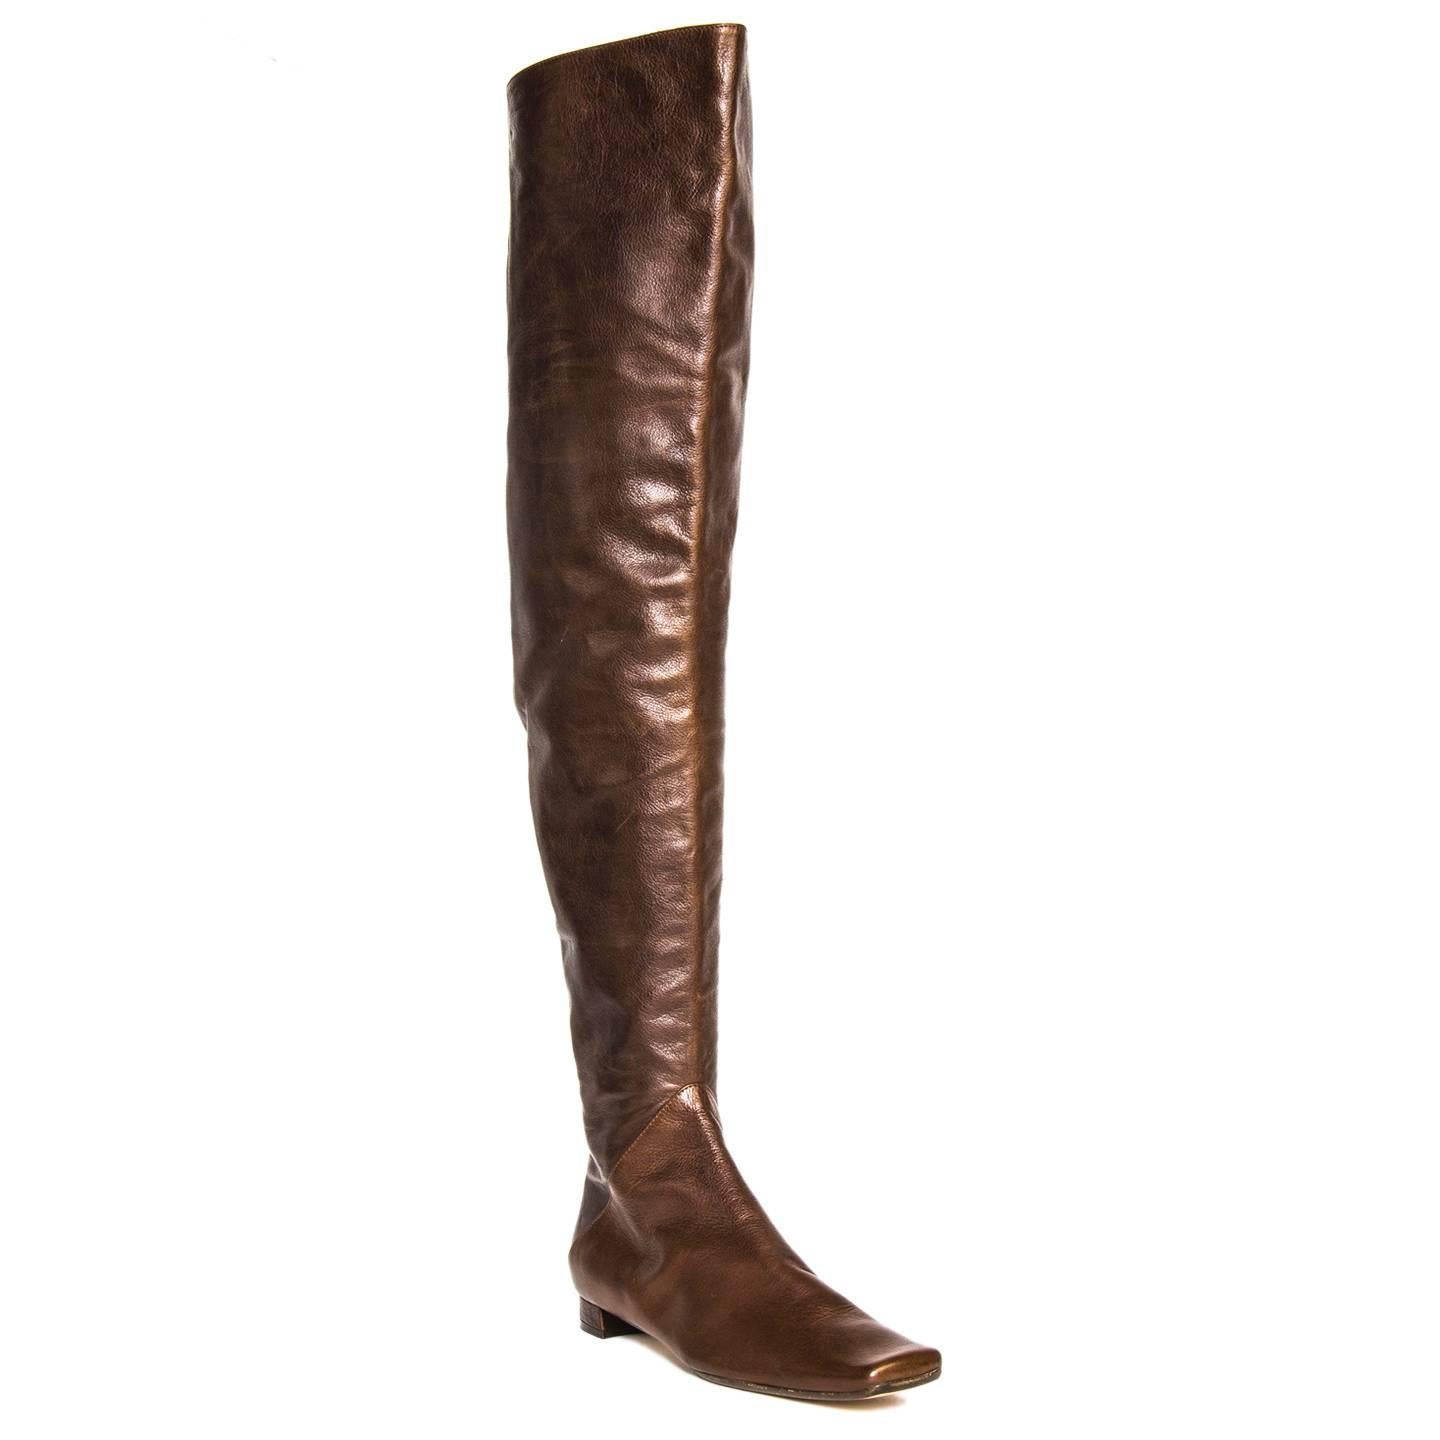 Brown leather thigh high boots with square toe. The instep zipper from heel to mid calf is covered with leather flaps. Vero cuoio. Made in Italy. Heel 1.5